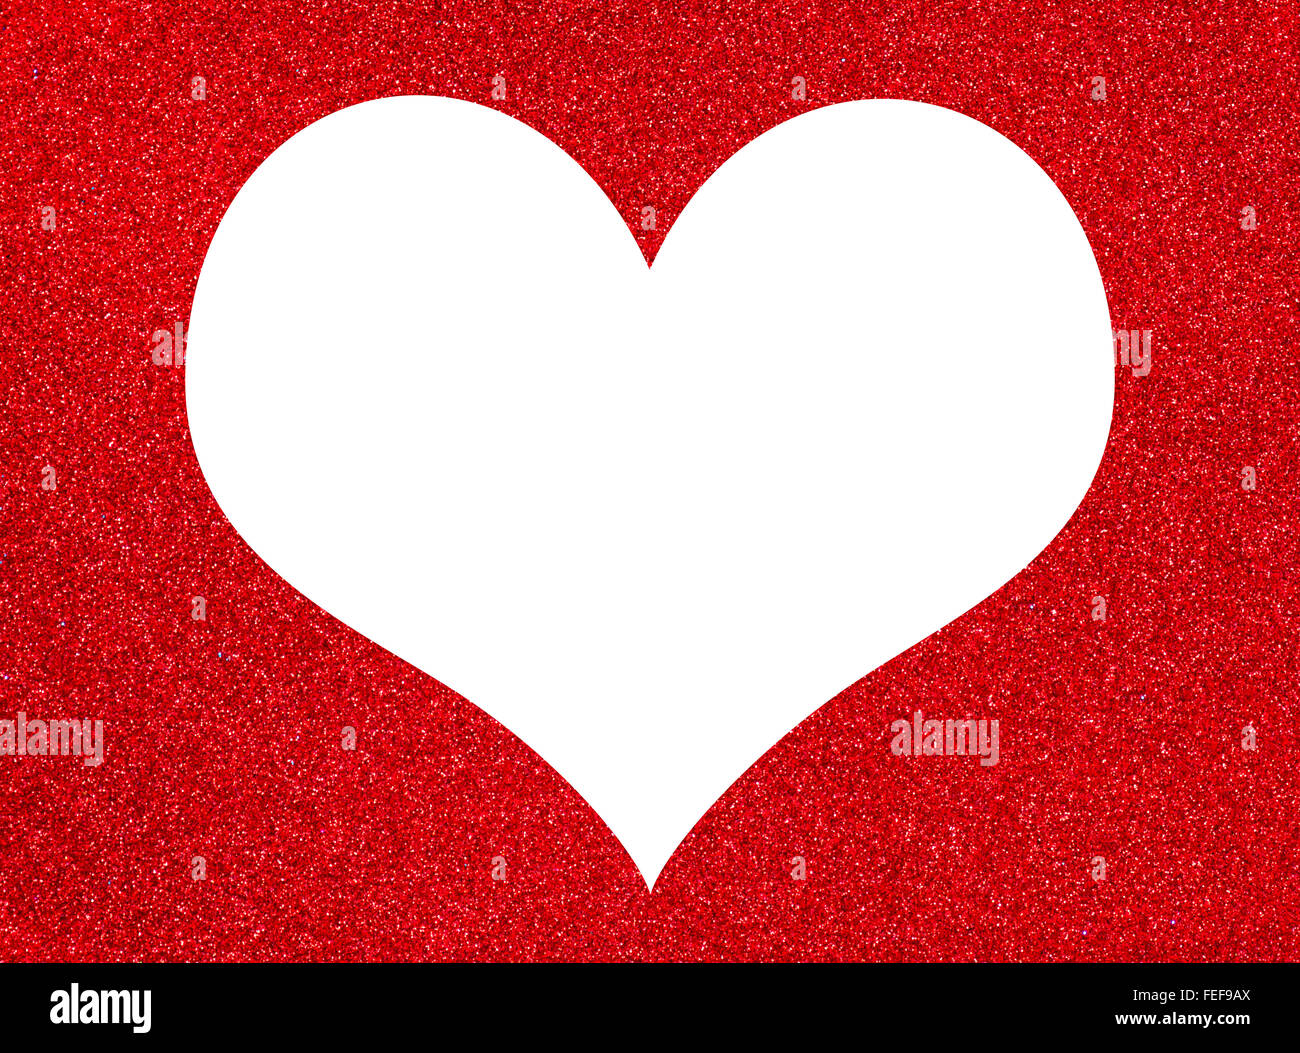 One large heart on a red Textured, glitter background with copy space lots of room for text ,ideal for Valentine's Day, poster, Stock Photo